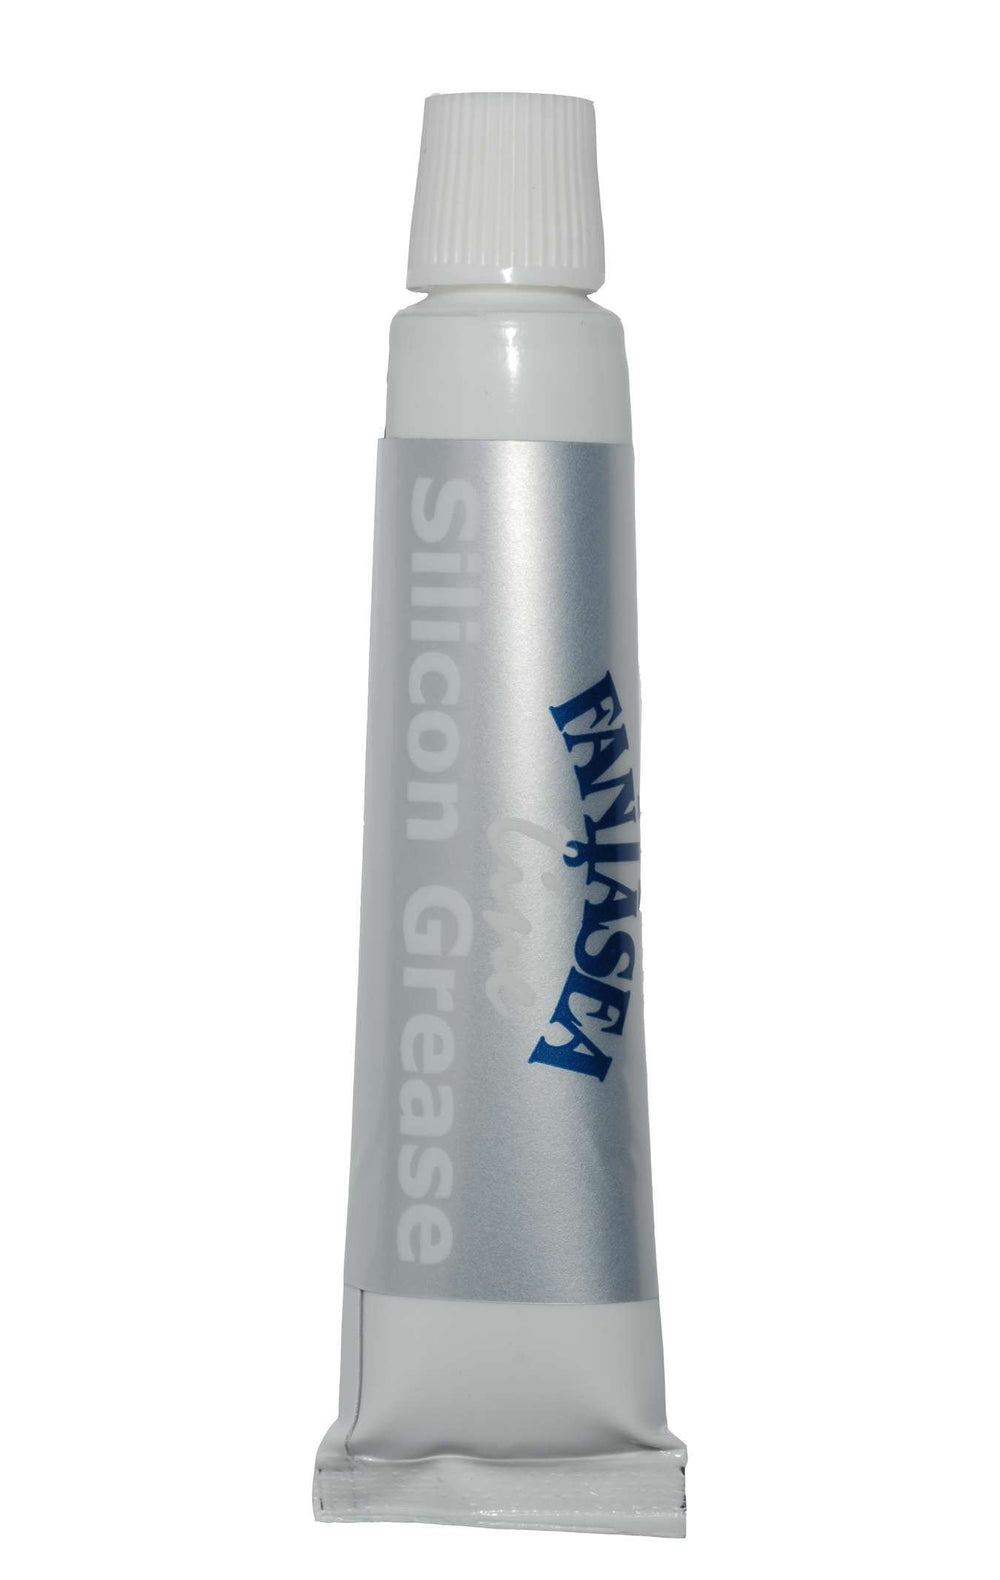 Fantasea Fantasea Silicone Grease by Oyster Diving Shop